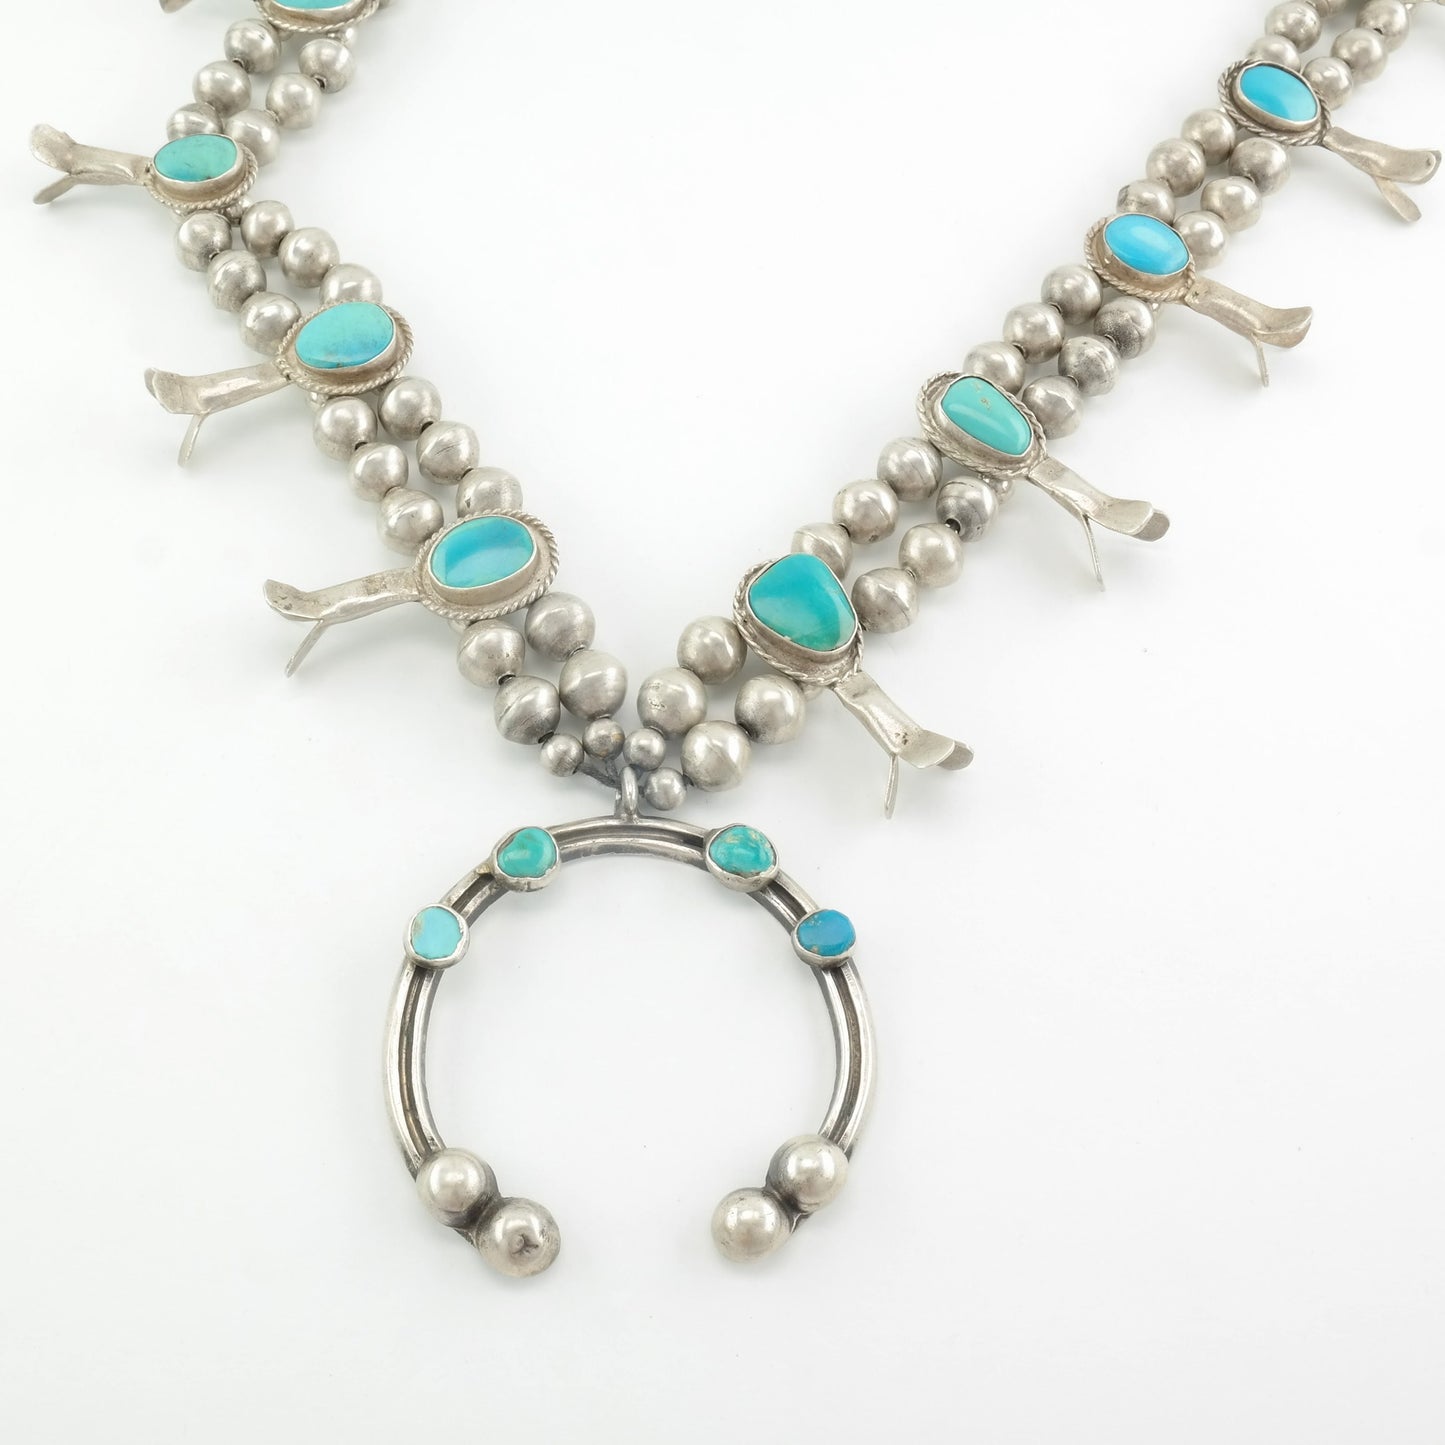 Antique Native American Sterling Silver Blue Turquoise Hand Made Beads Necklace Squash Blossom